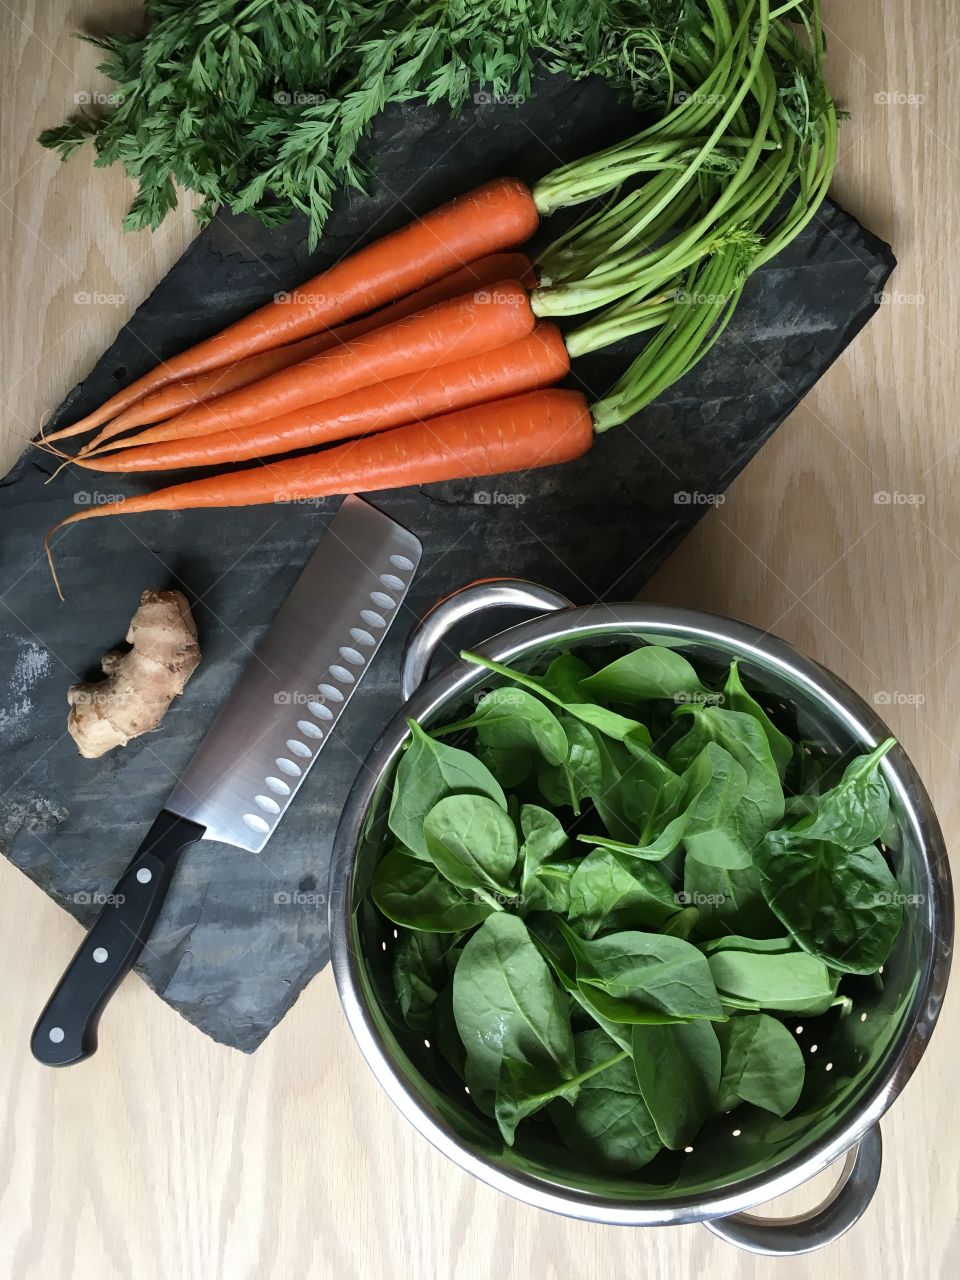 Cooking with fresh vegetables; baby spinach, organic carrots, ginger root. Healthy spring time meals.